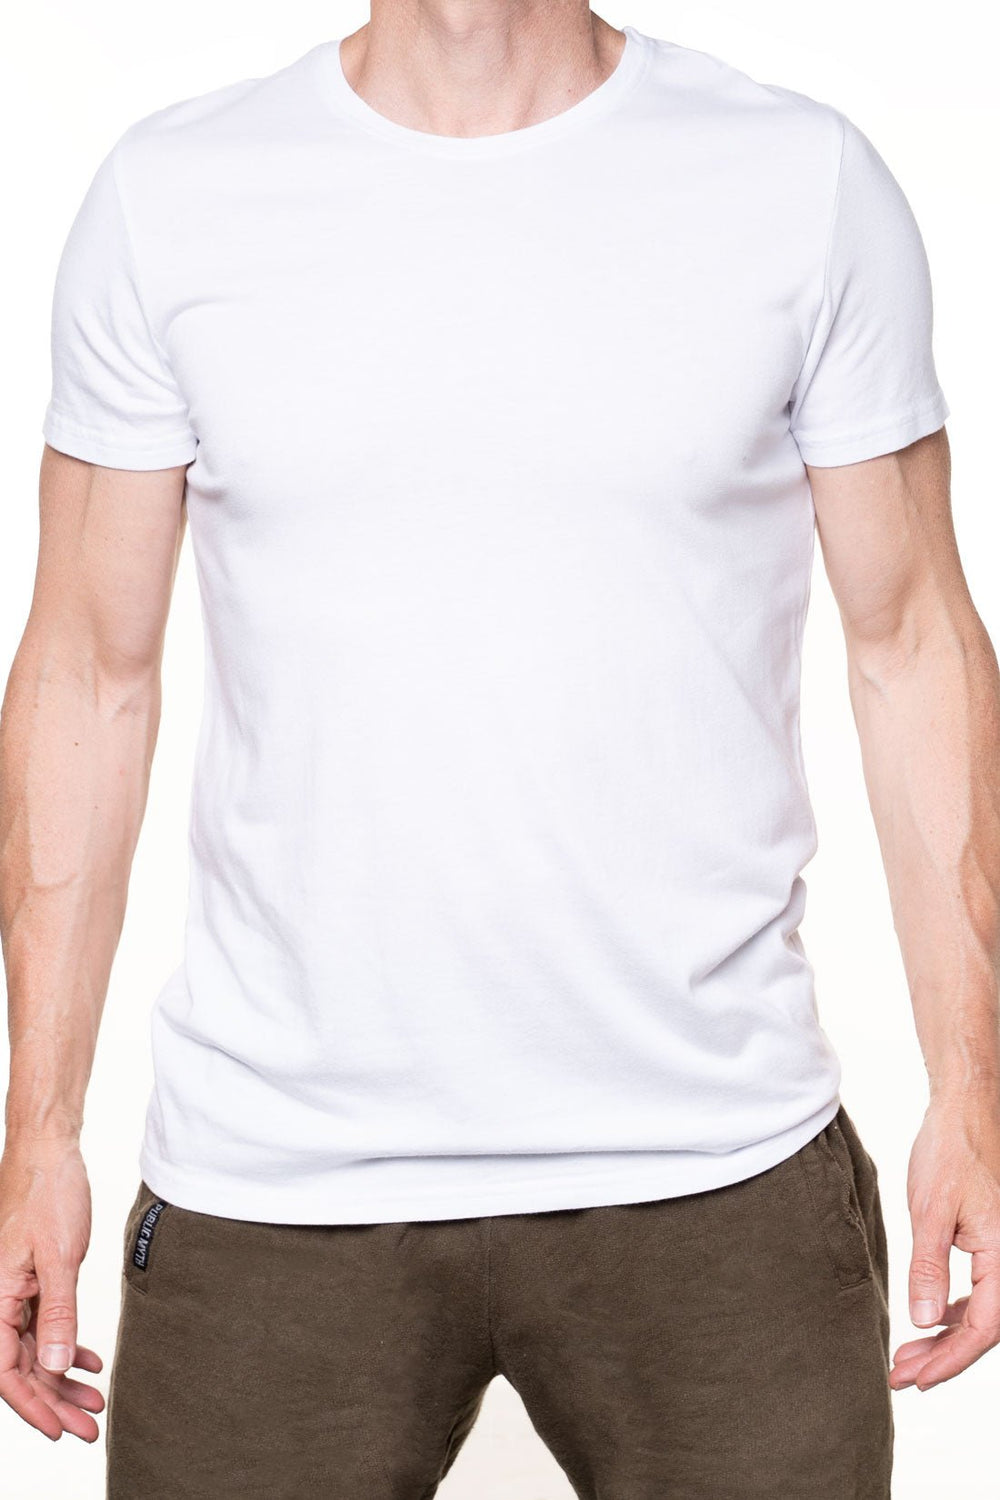 White men's bamboo T-shirt made from bamboo and cotton